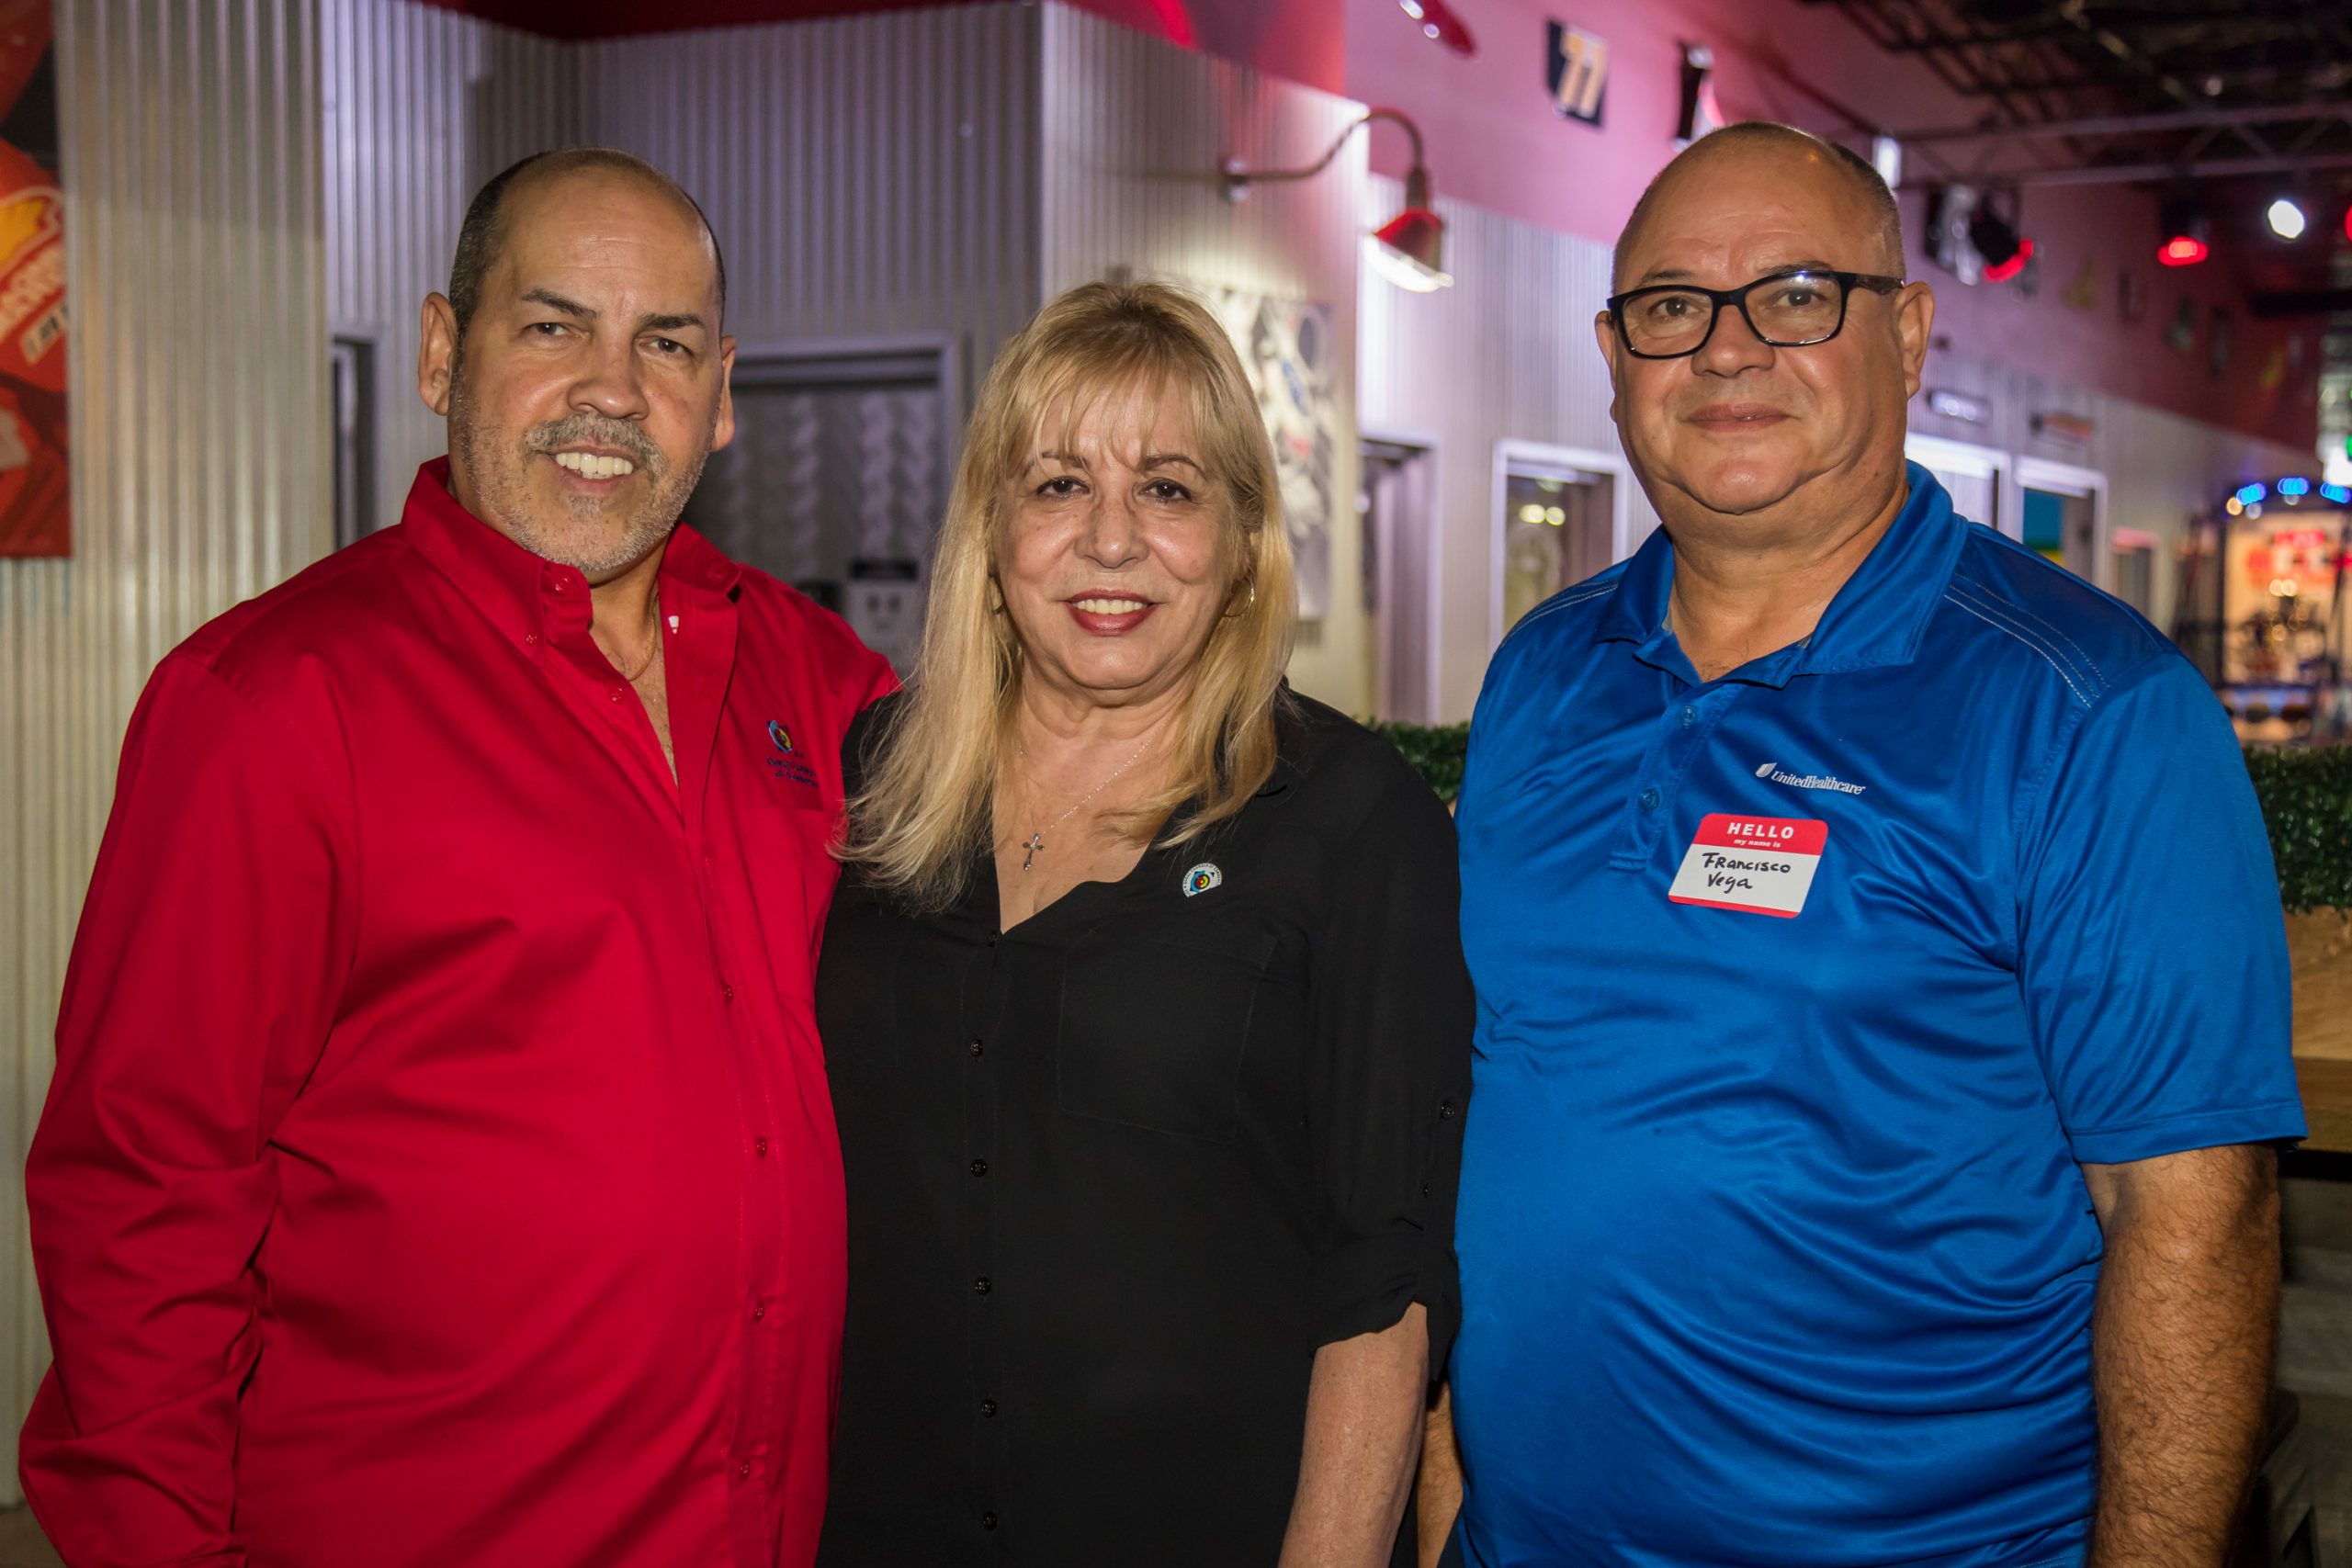 K1 Speed Networking Event Sponsored by Coral Gables Trust, Miami's Community Newspapers and K1 Speed. WIth Mayor Roberto Martell.